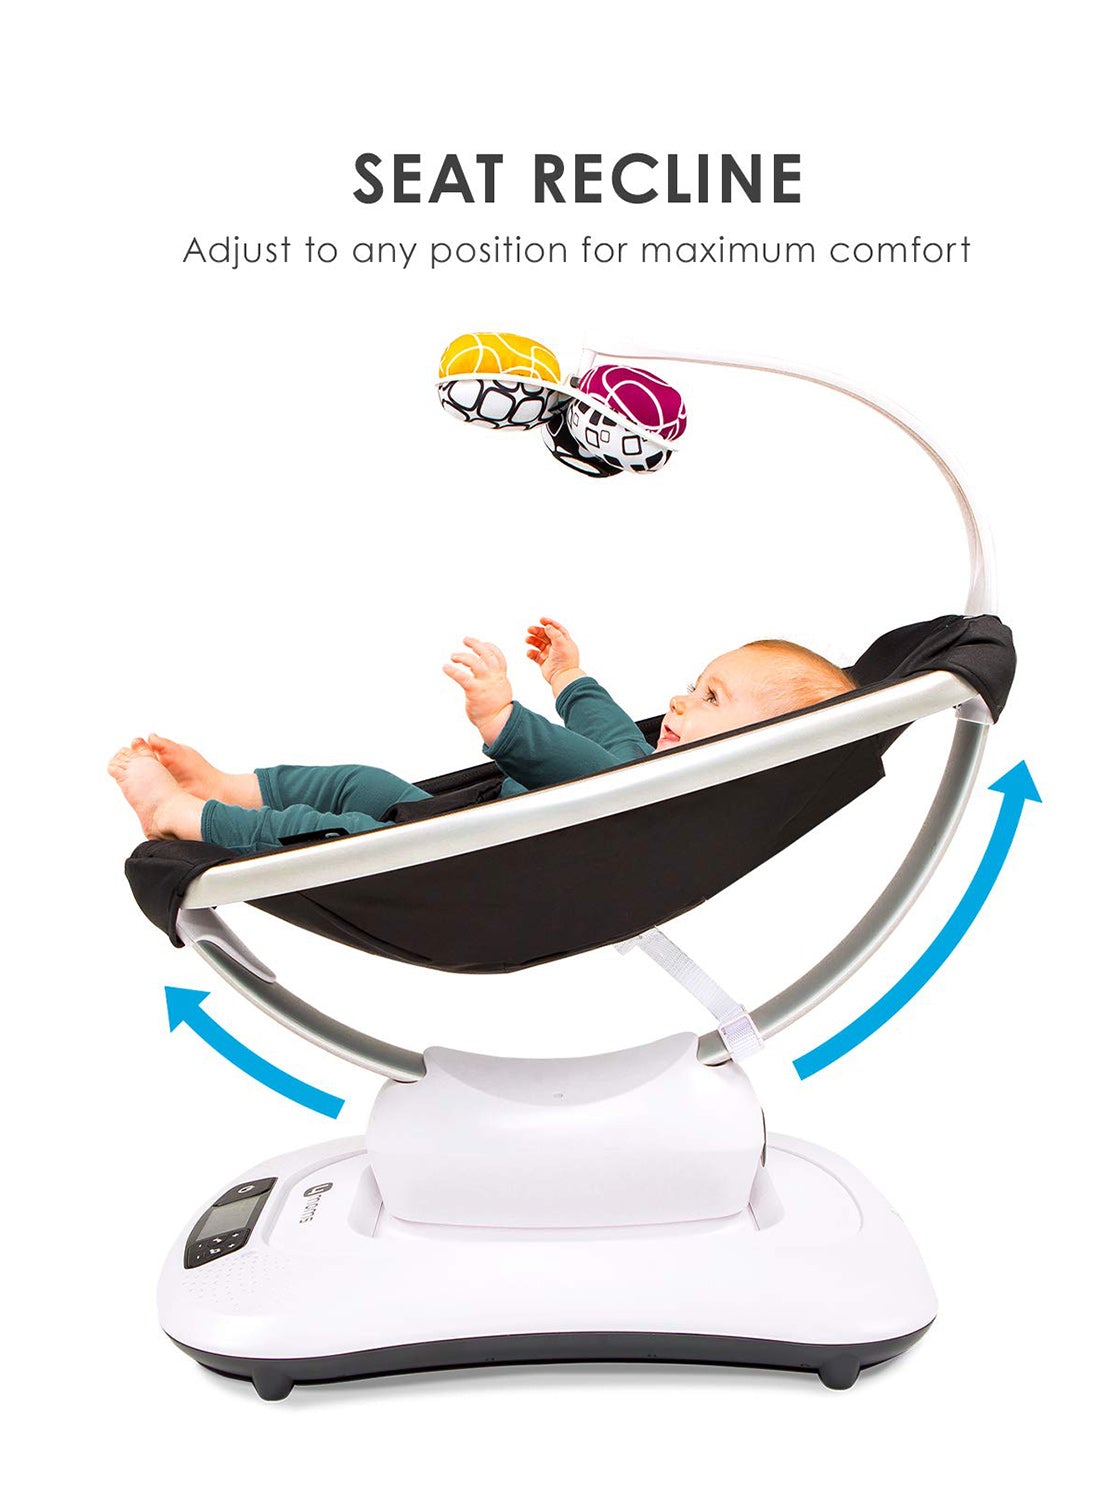 4moms mamaRoo 4 Baby Swing, 5 Unique Motions, Smooth - ANB Baby -4 moms baby swing